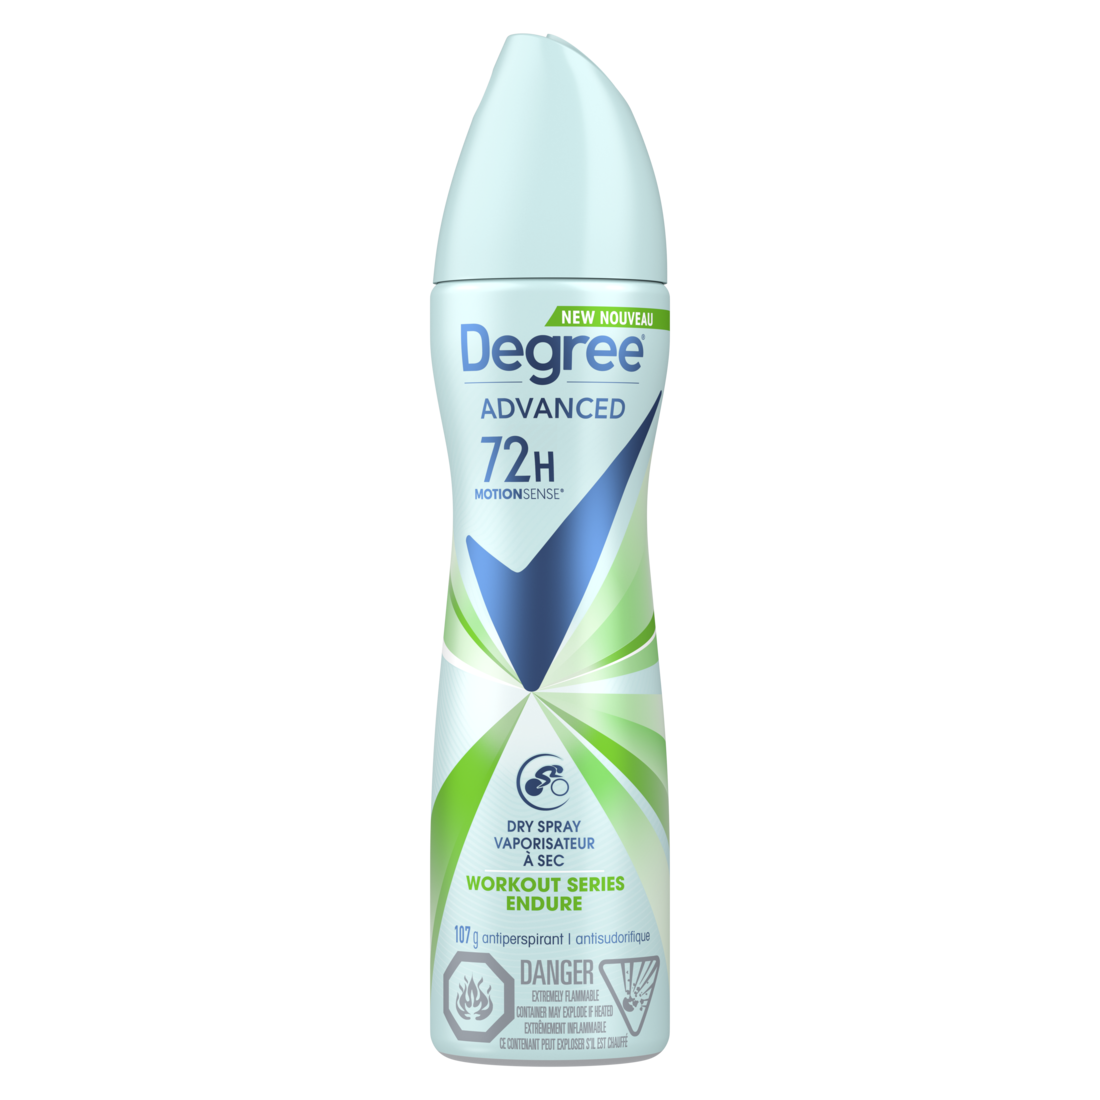 Degree Advanced Workout Endure Dry Spray Antiperspirant Deodorant for 72H Sweat & Odour Protection for women 107 g